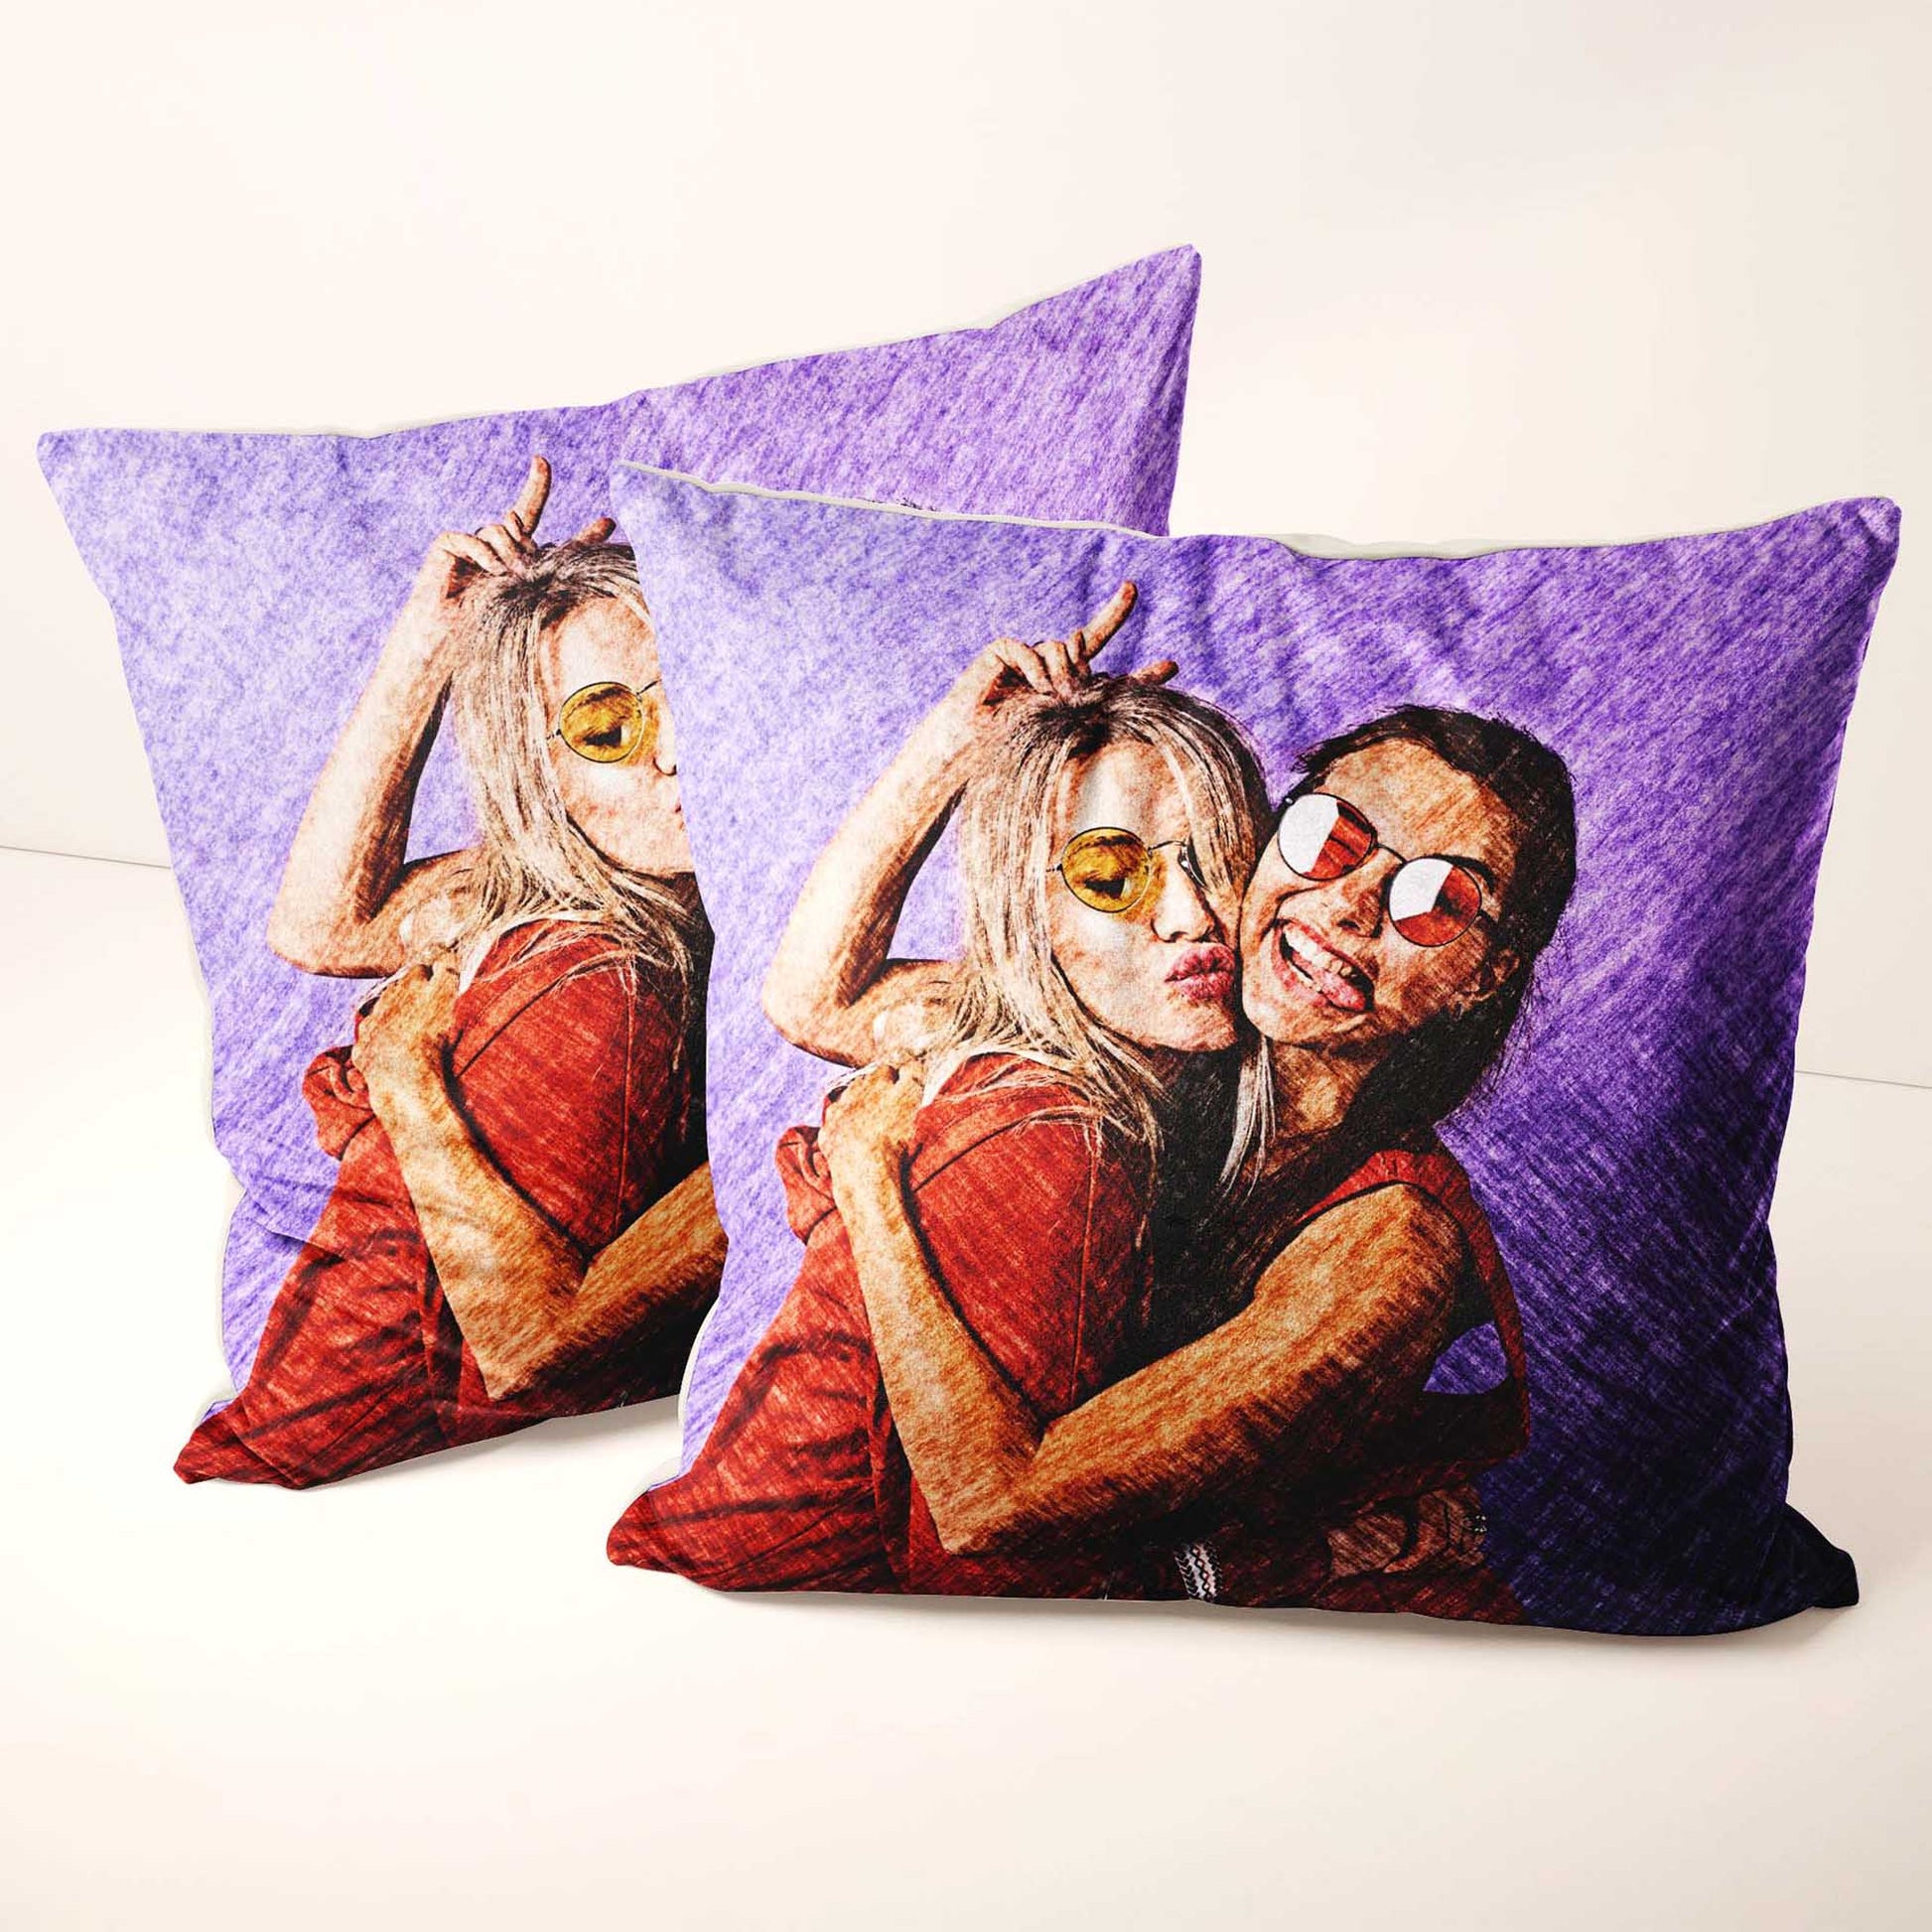 Experience the artistic flow of a Personalised Charcoal Drawing Cushion. Handcrafted with care and made from soft velvet, it provides a comfortable and cosy touch. The drawing from your photo captures the natural and real beauty 